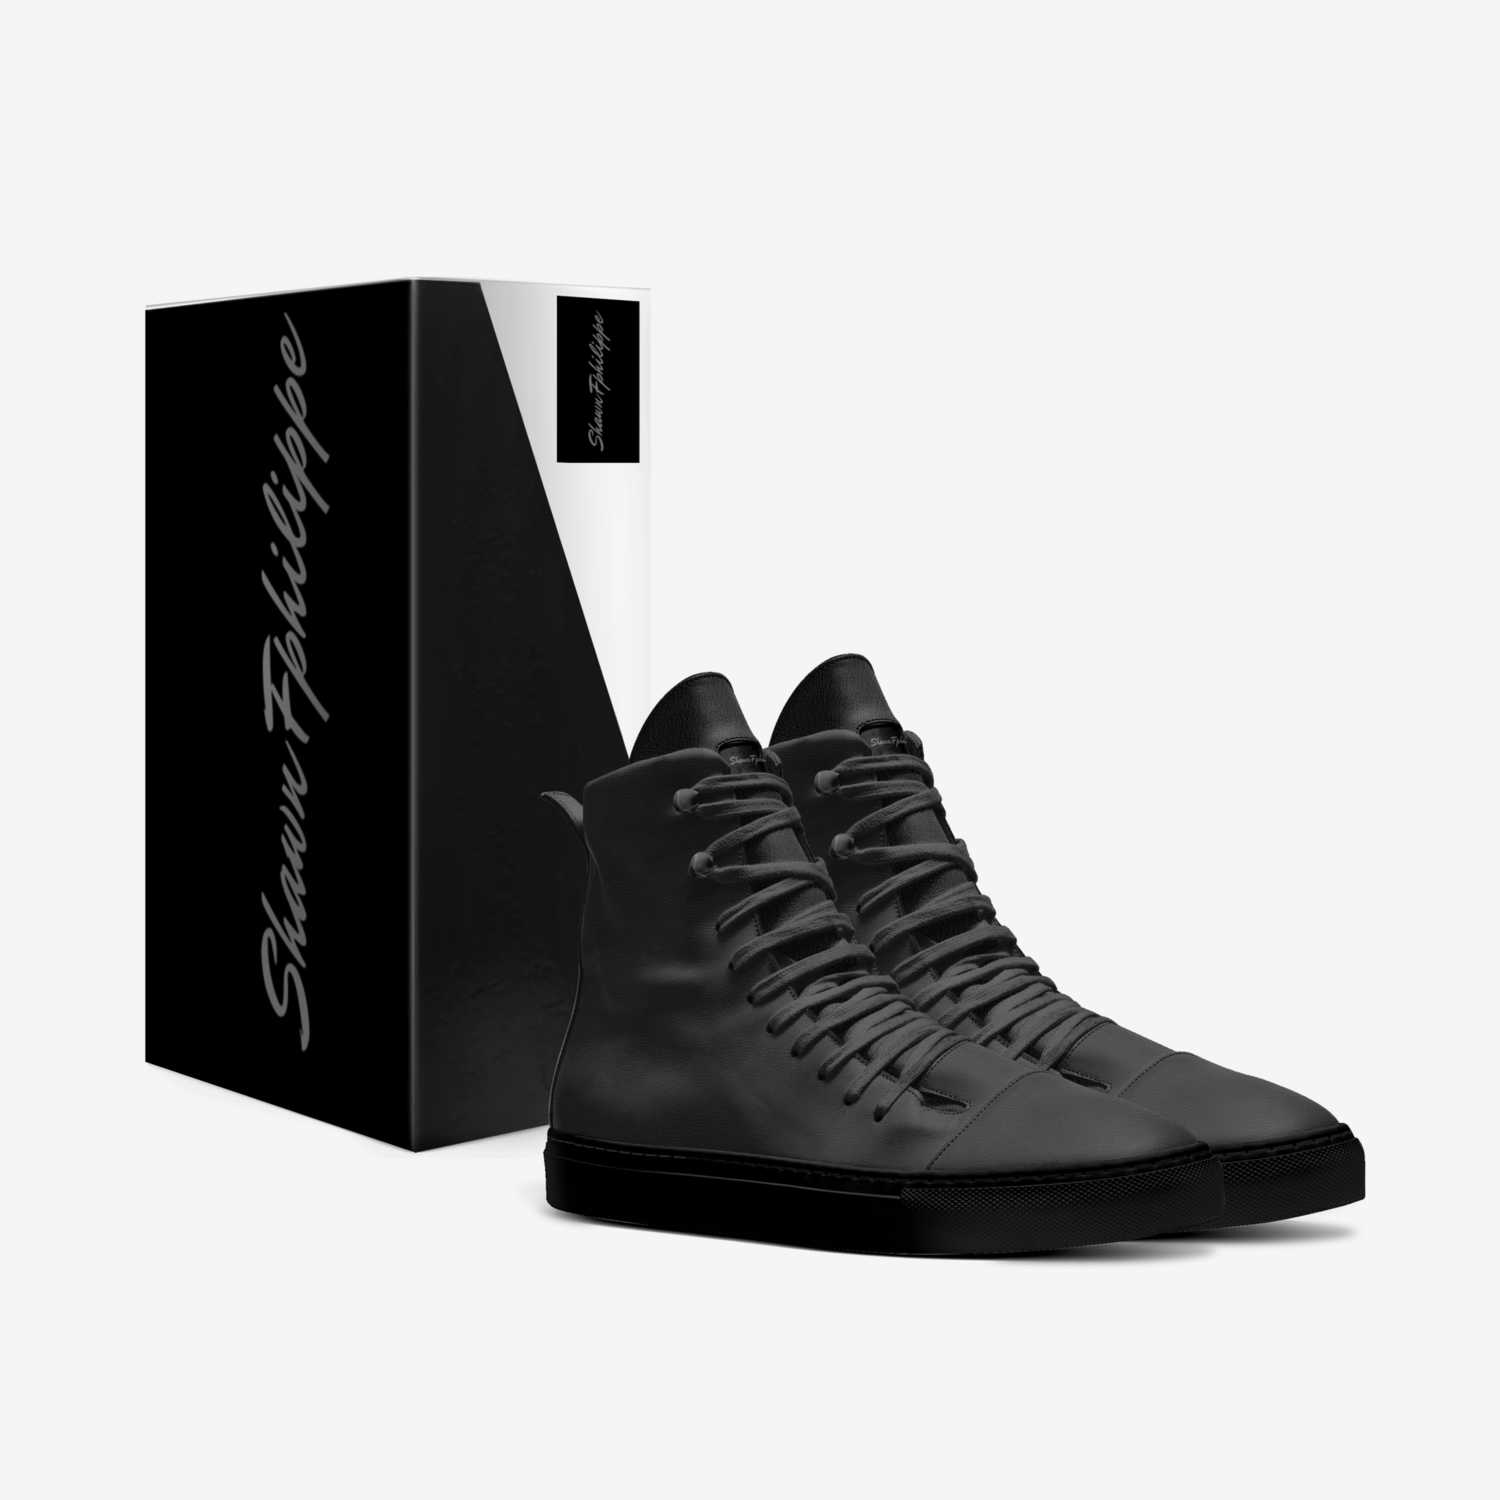 Shawn Fphilippe custom made in Italy shoes by S. Hobbs | Box view